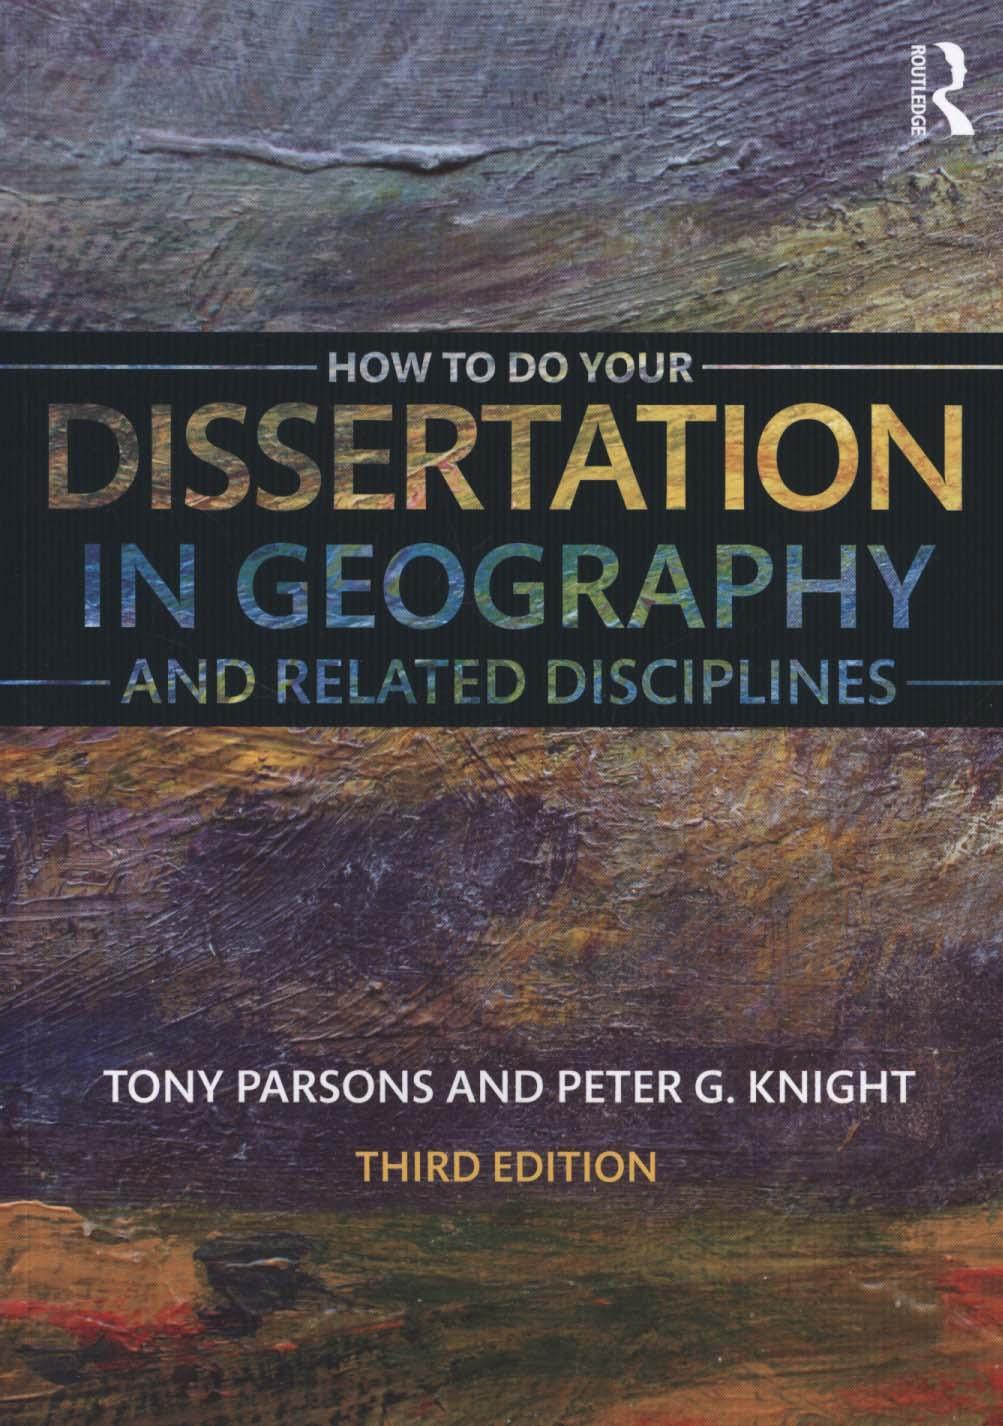 How To Do Your Dissertation in Geography and Related Discipl - Tony Parsons